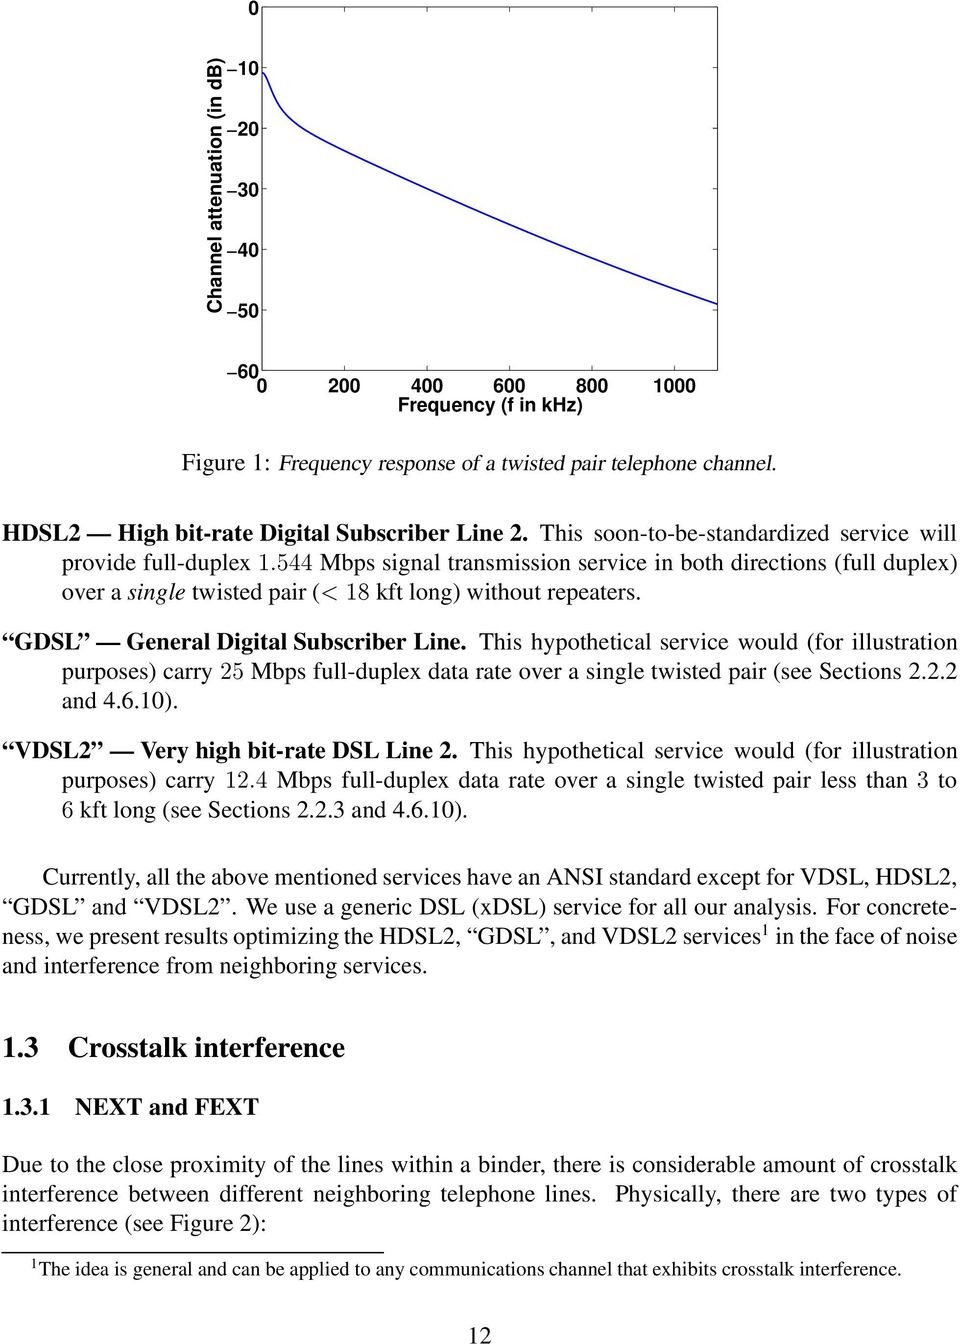 GDSL General Digital Subscriber Line. This hypothetical service would (for illustration purposes) carry 5 Mbps full-duplex data rate over a single twisted pair (see Sections.. and 4.6.1).